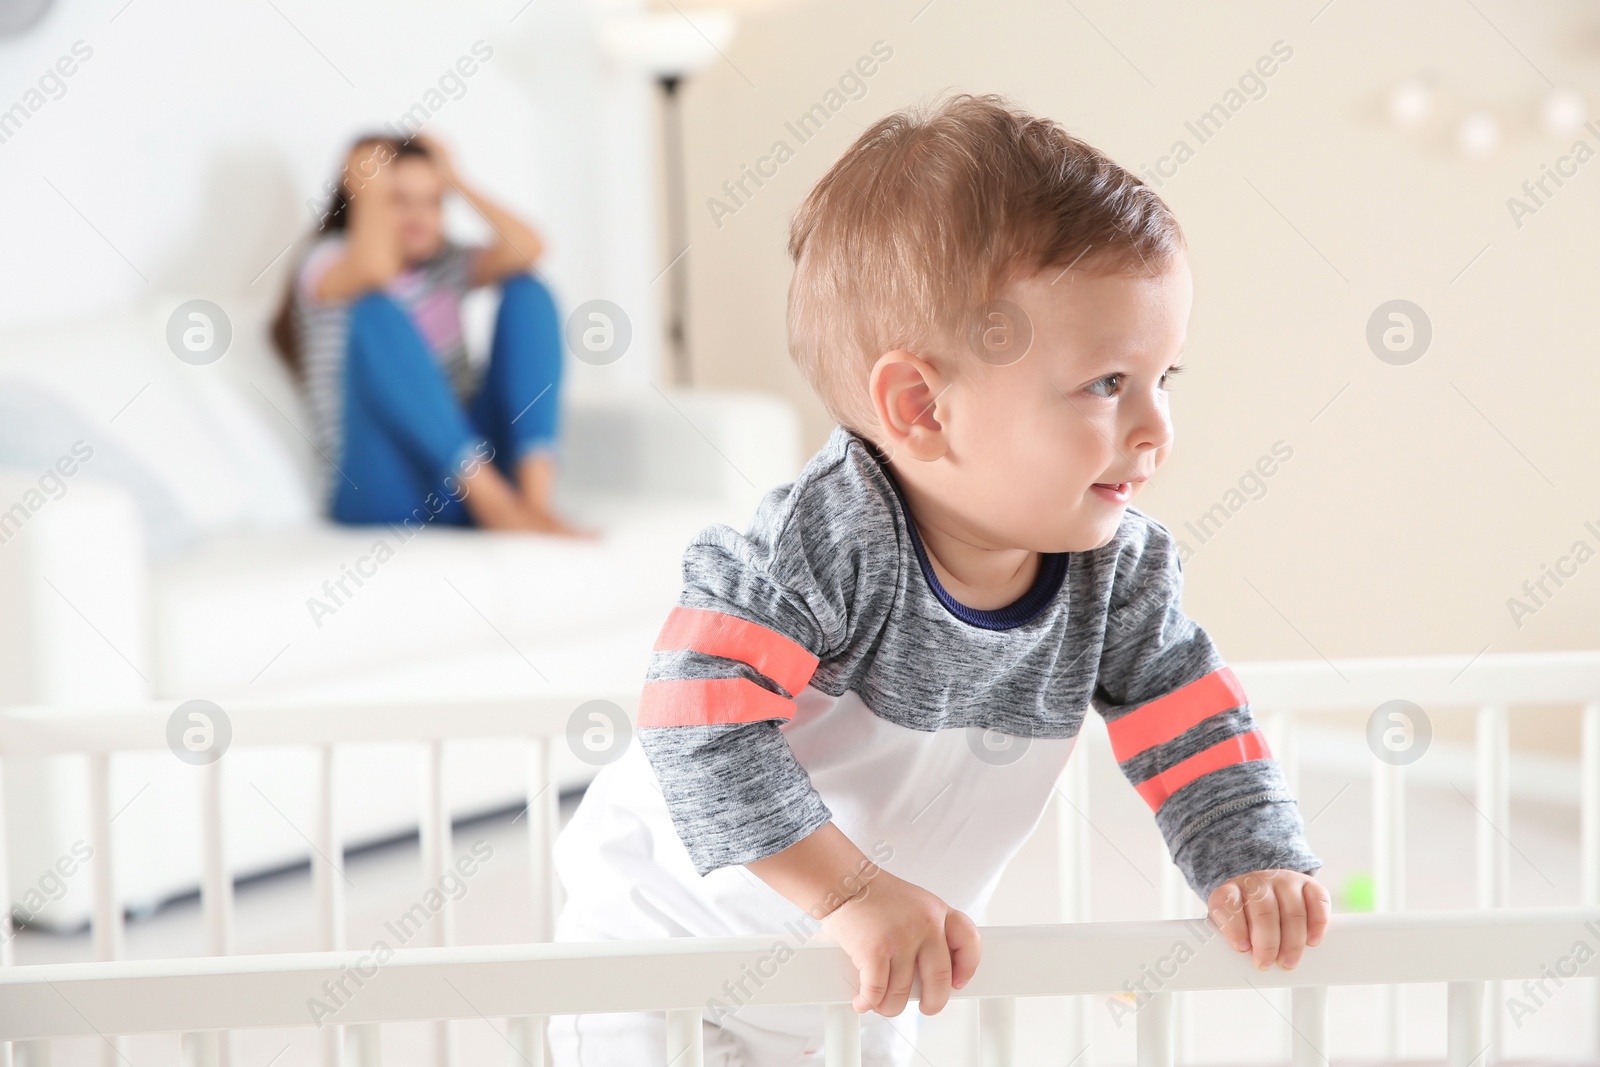 Photo of Cute baby boy in crib and young mother suffering from postnatal depression on blurred background